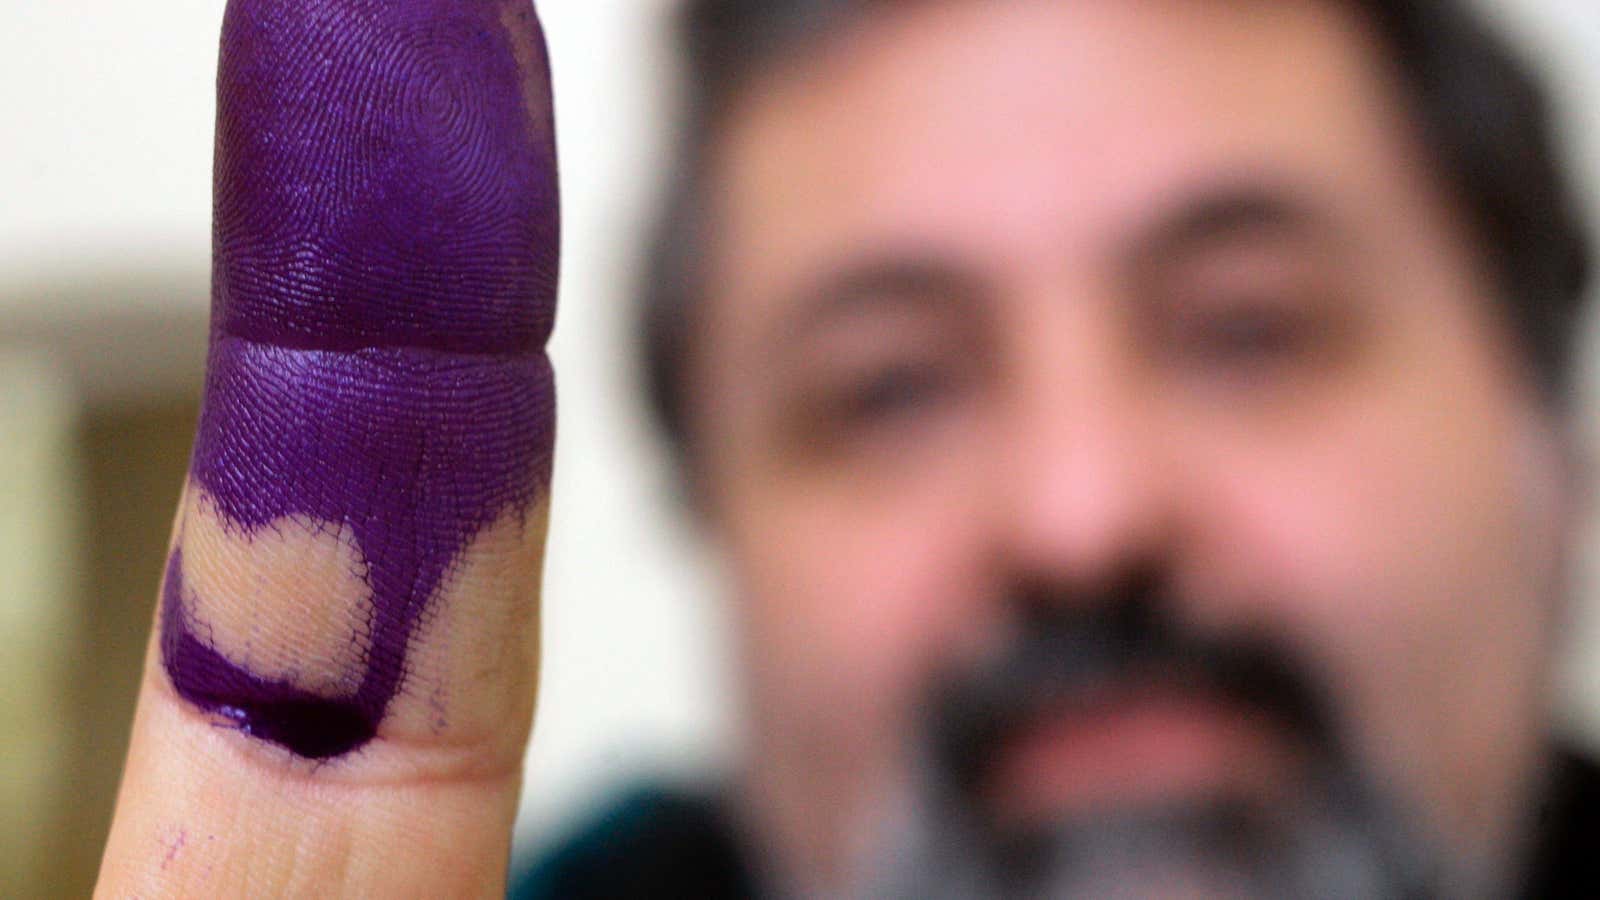 Indelible ink: The mark of democracy